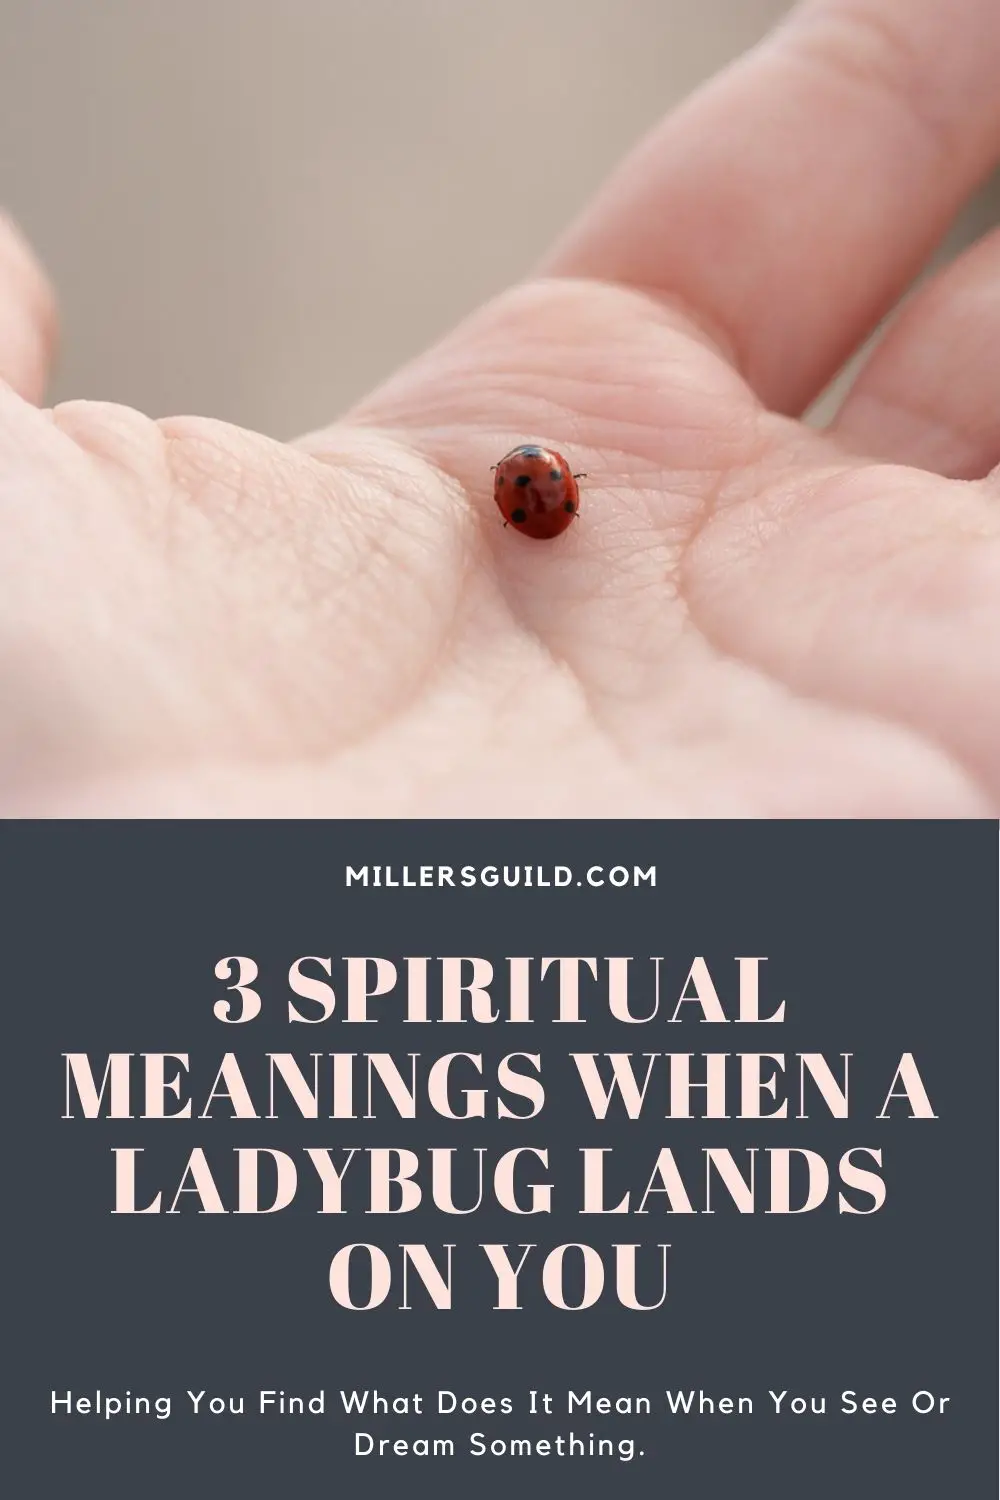 Ladybugs In Your Home